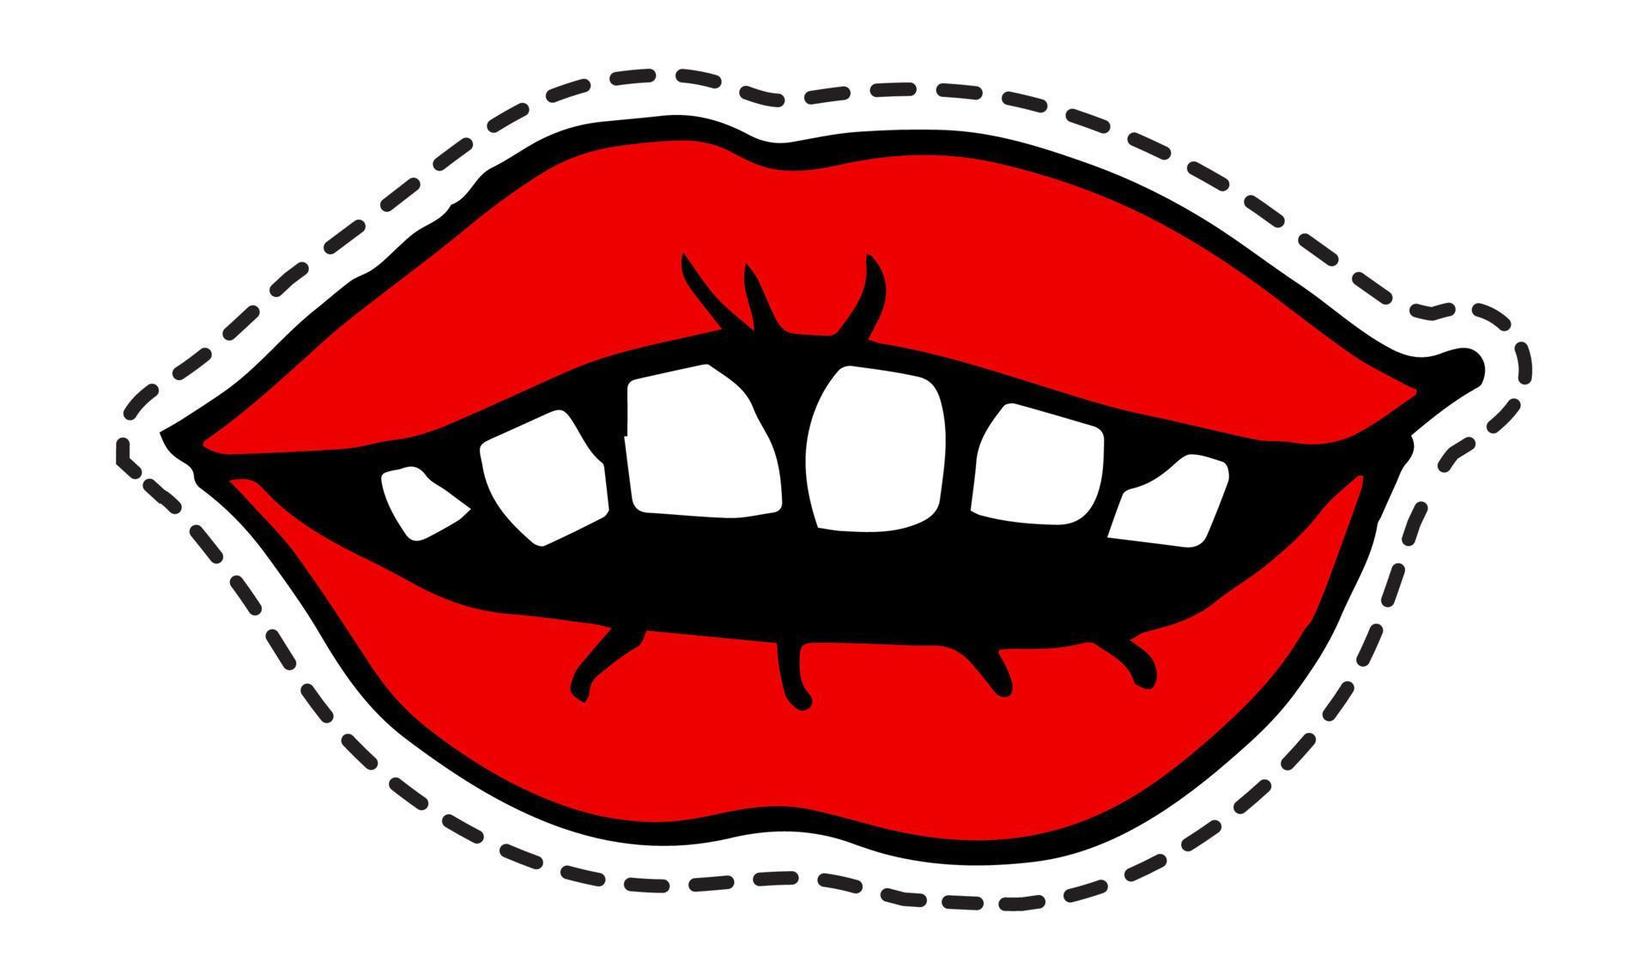 Makeup on lips, open mouth showing teeth sticker vector